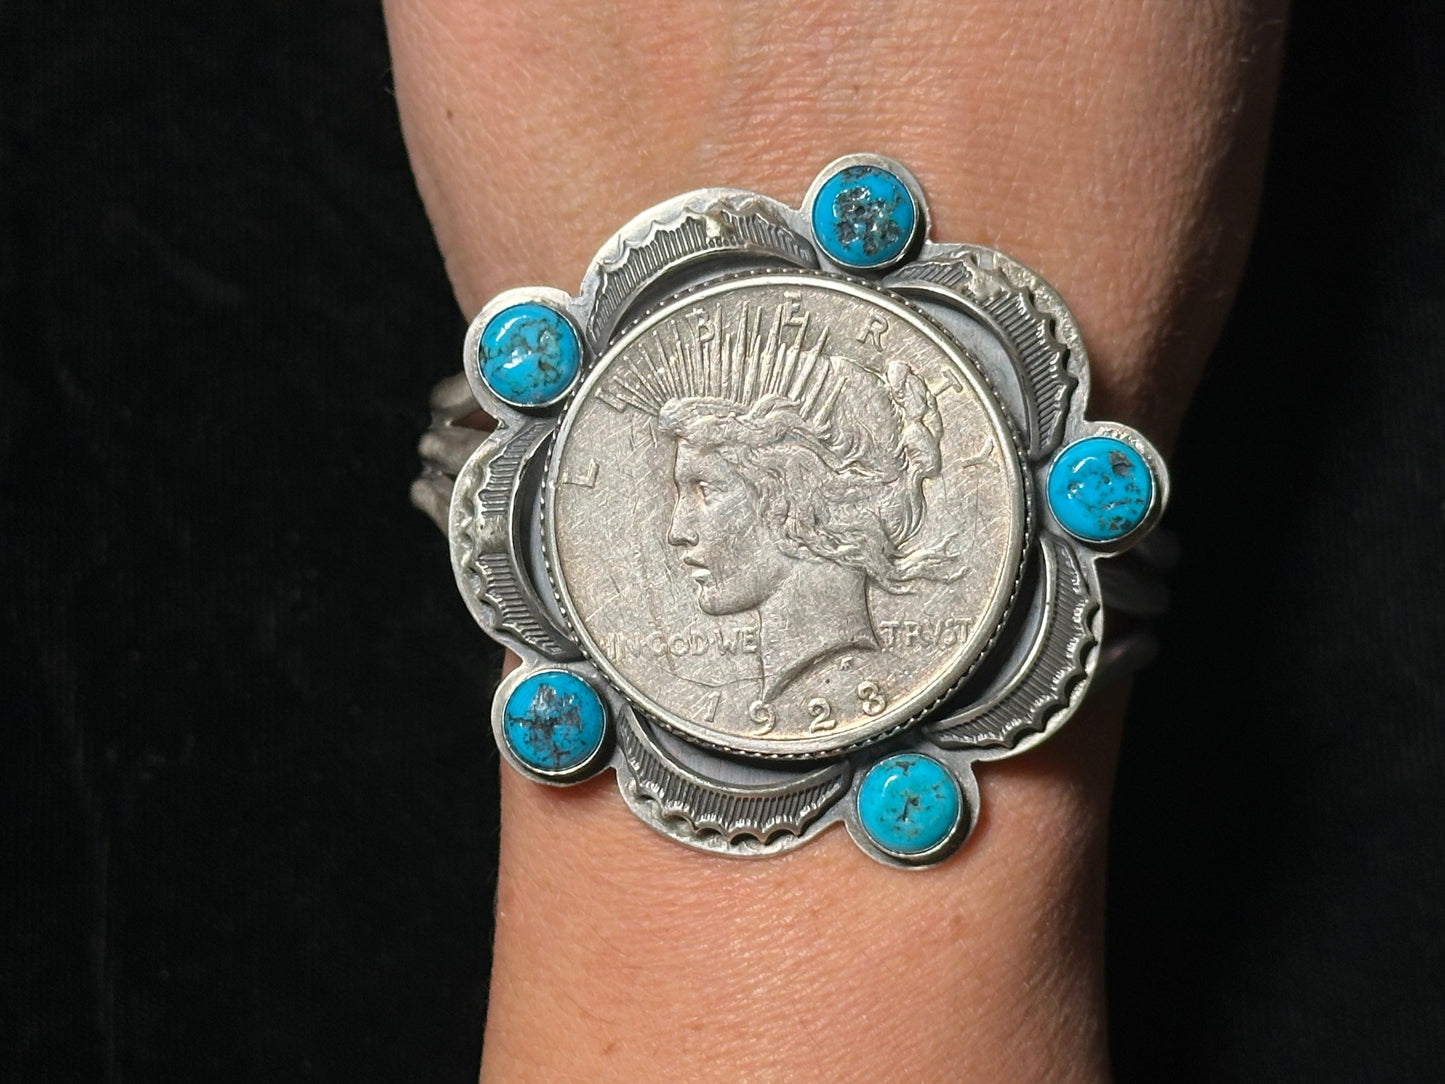 6"-7" 1923 Peace Silver Dollar and Sleeping Beauty Turquoise Cuff Bracelet